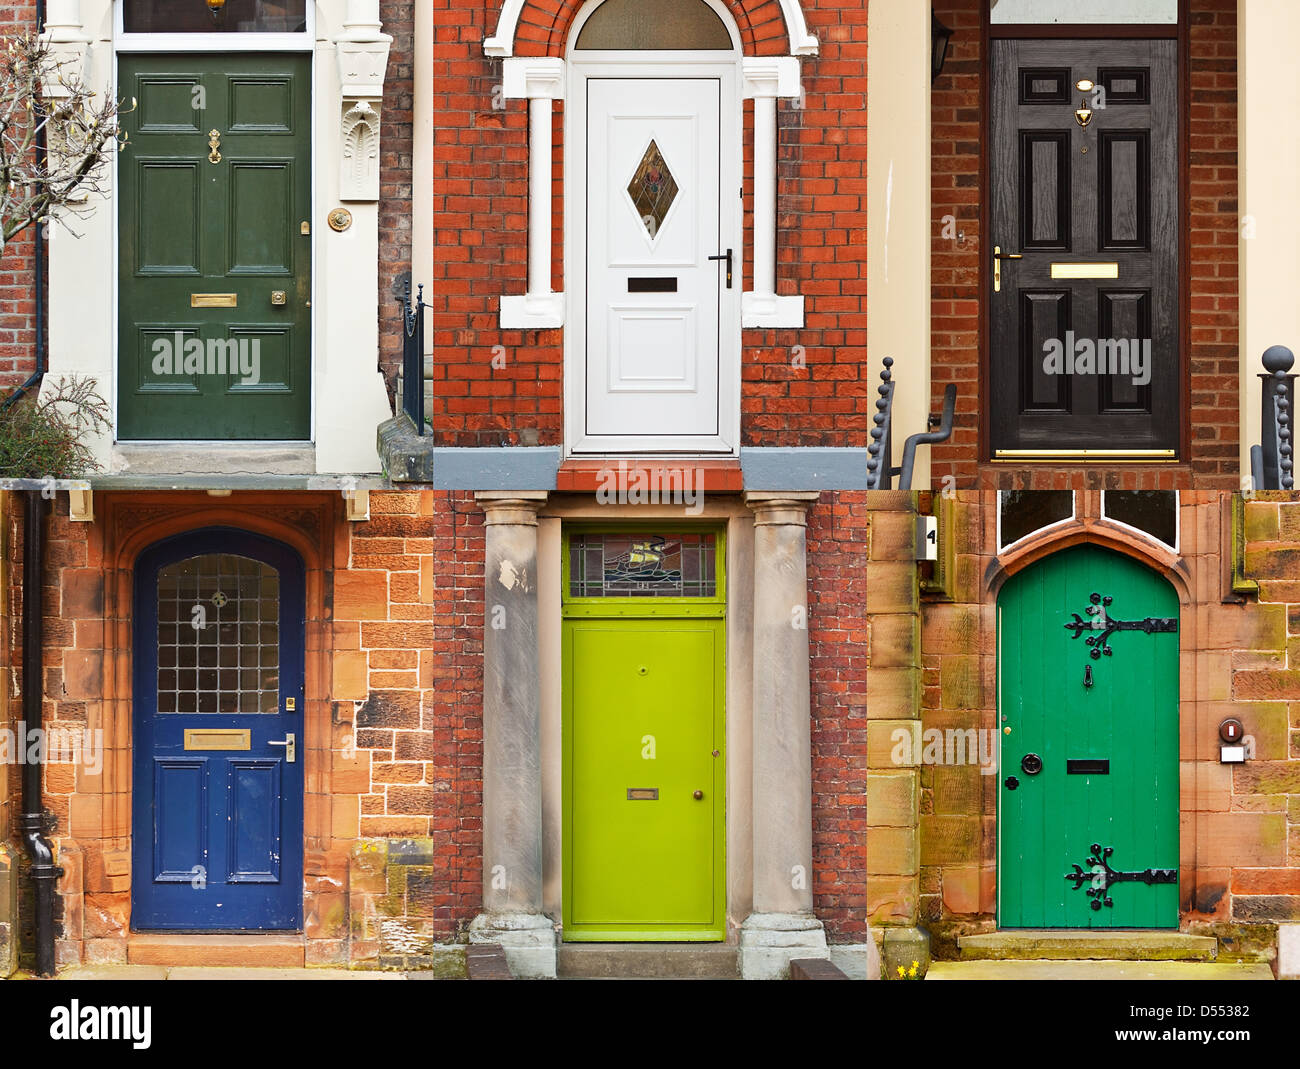 A selection of residential front doors good for estate agents and symbolising opening new doors Stock Photo